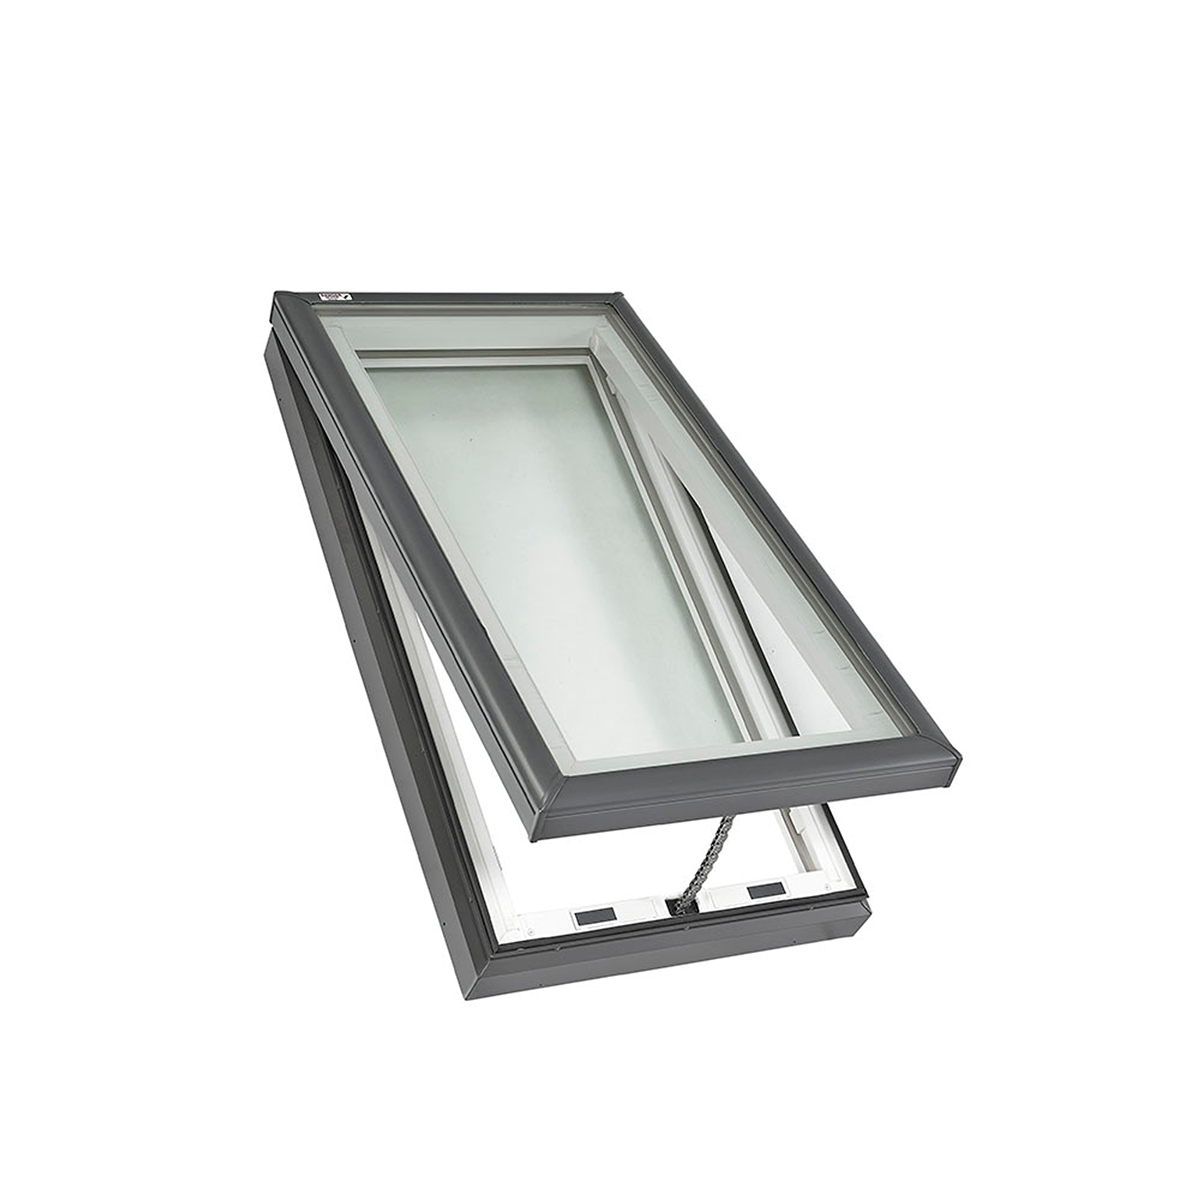 Manual Curb-Mount Skylight with Laminated Low-E3 Glass - 22-1/2 x 46-1/2 inch - VCM 2246